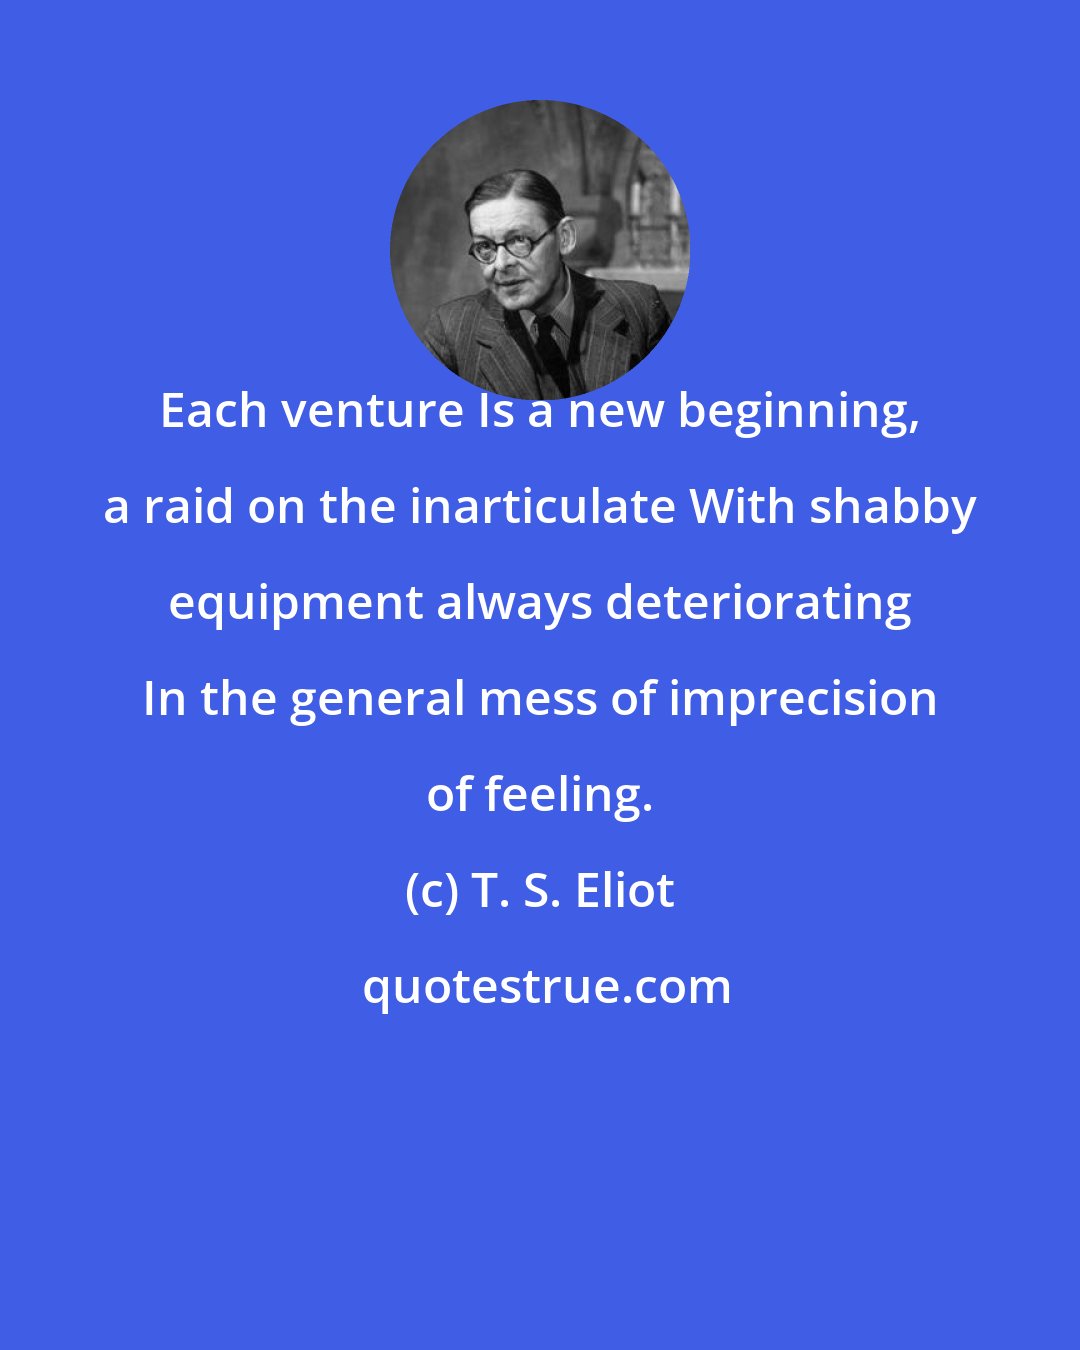 T. S. Eliot: Each venture Is a new beginning, a raid on the inarticulate With shabby equipment always deteriorating In the general mess of imprecision of feeling.